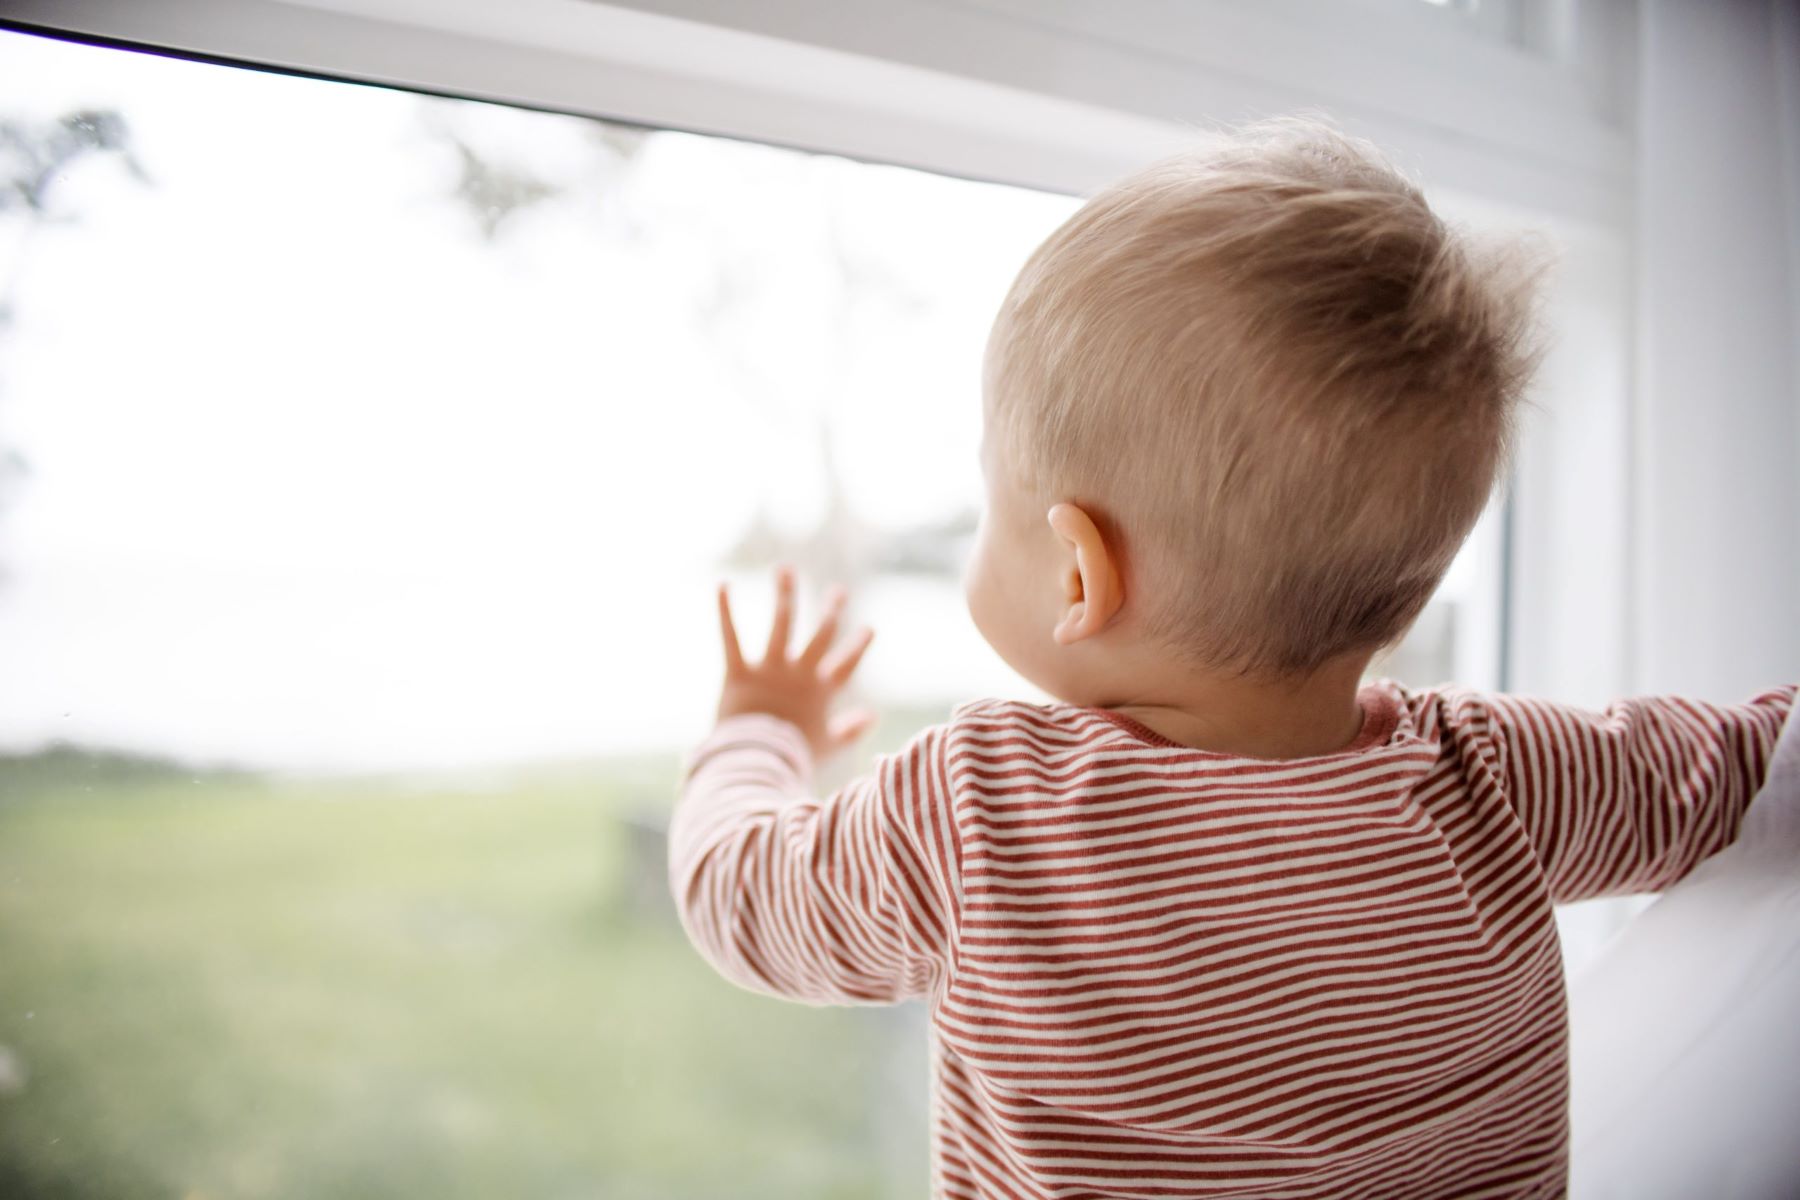 How To Childproof Sliding Glass Doors